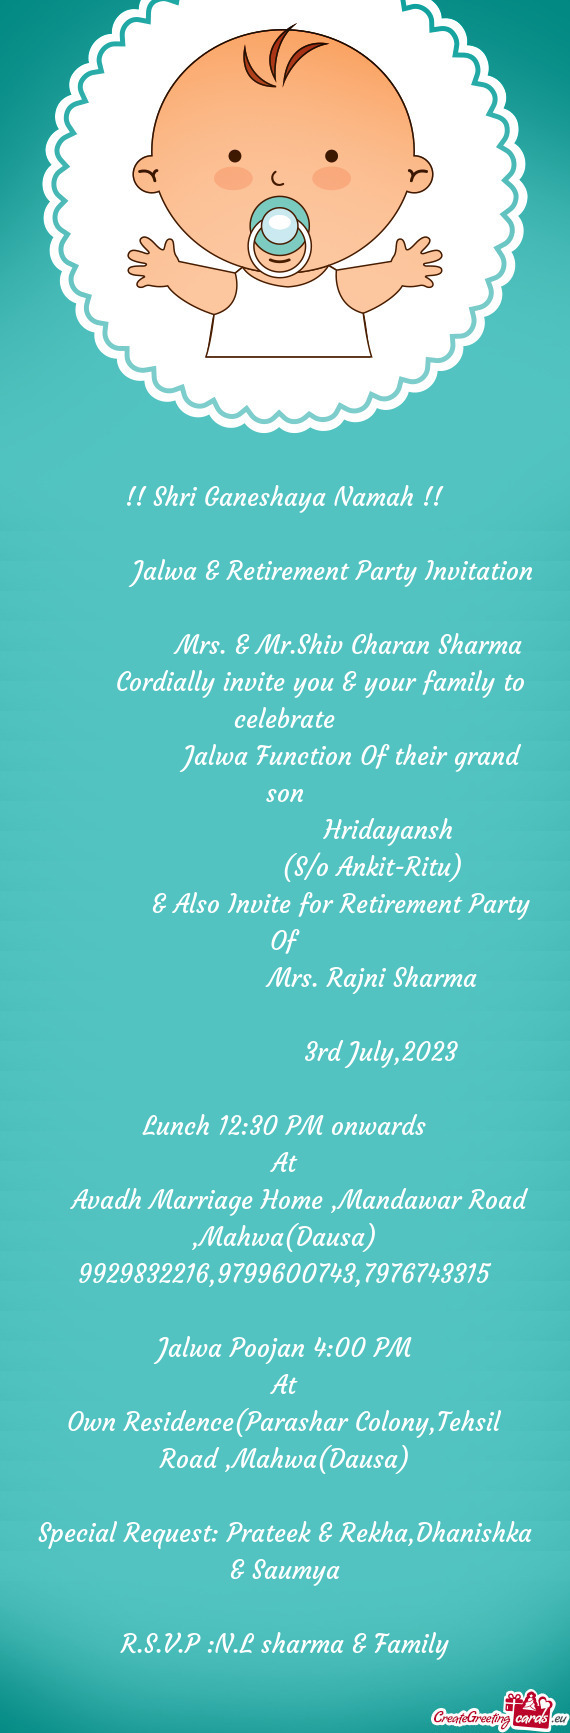 Jalwa Function Of their grand son